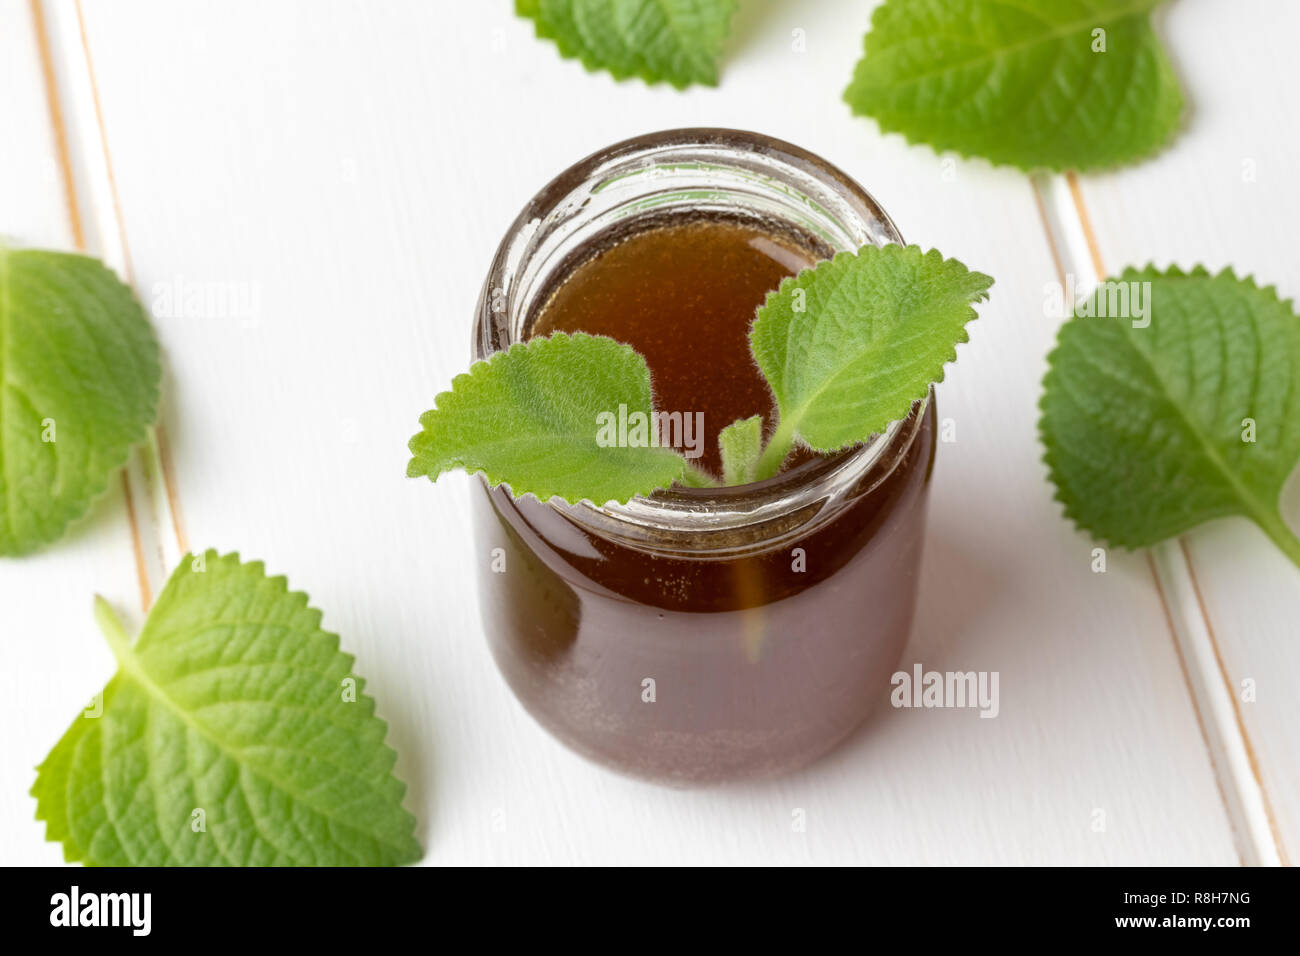 A jar of silver spurflower syrup against common cold with fresh Plectranthus argentatus plant Stock Photo